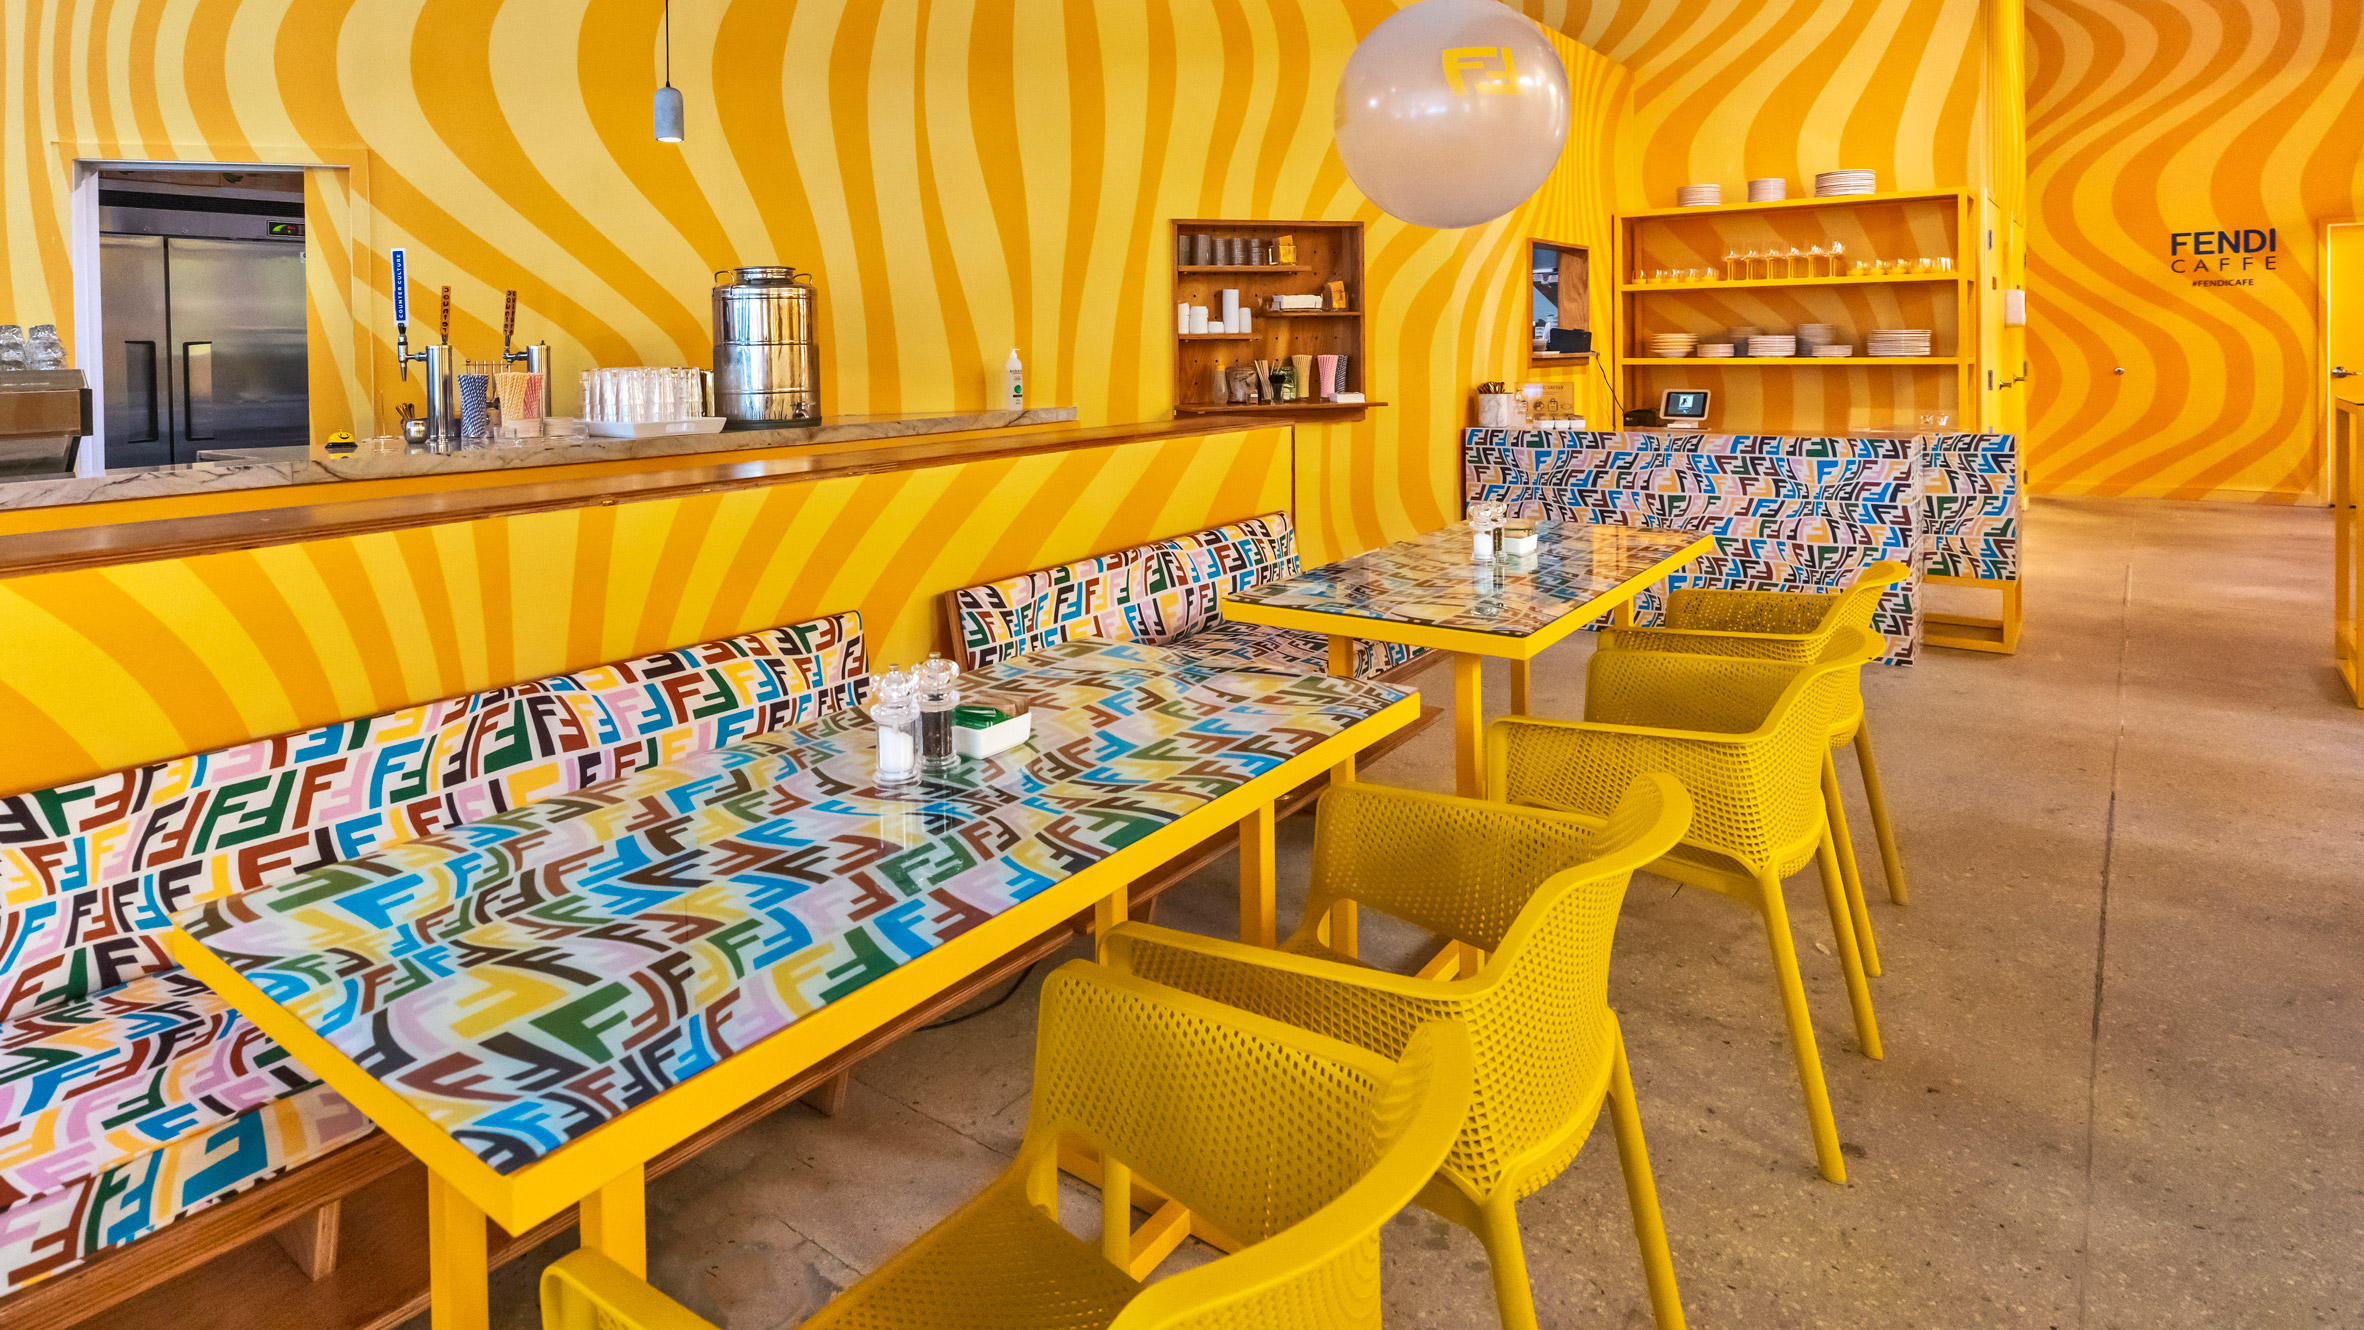 The Fendi Caffe features a psychedelic twist on the brand's logo